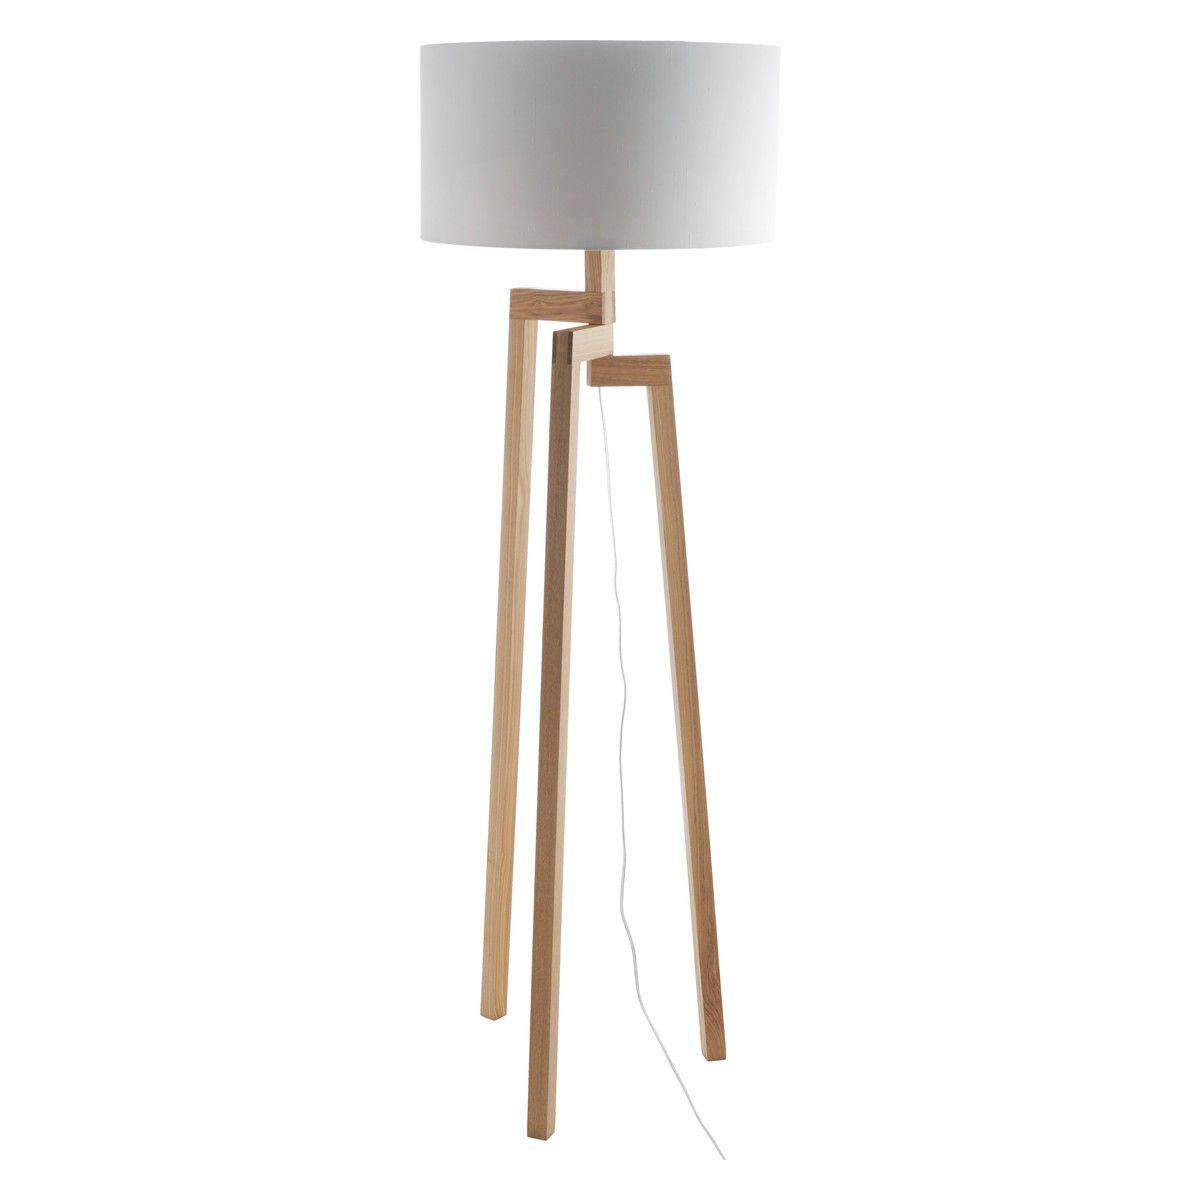 Contract Floor Lamp Google Search Wooden Floor Lamps with size 1200 X 1200